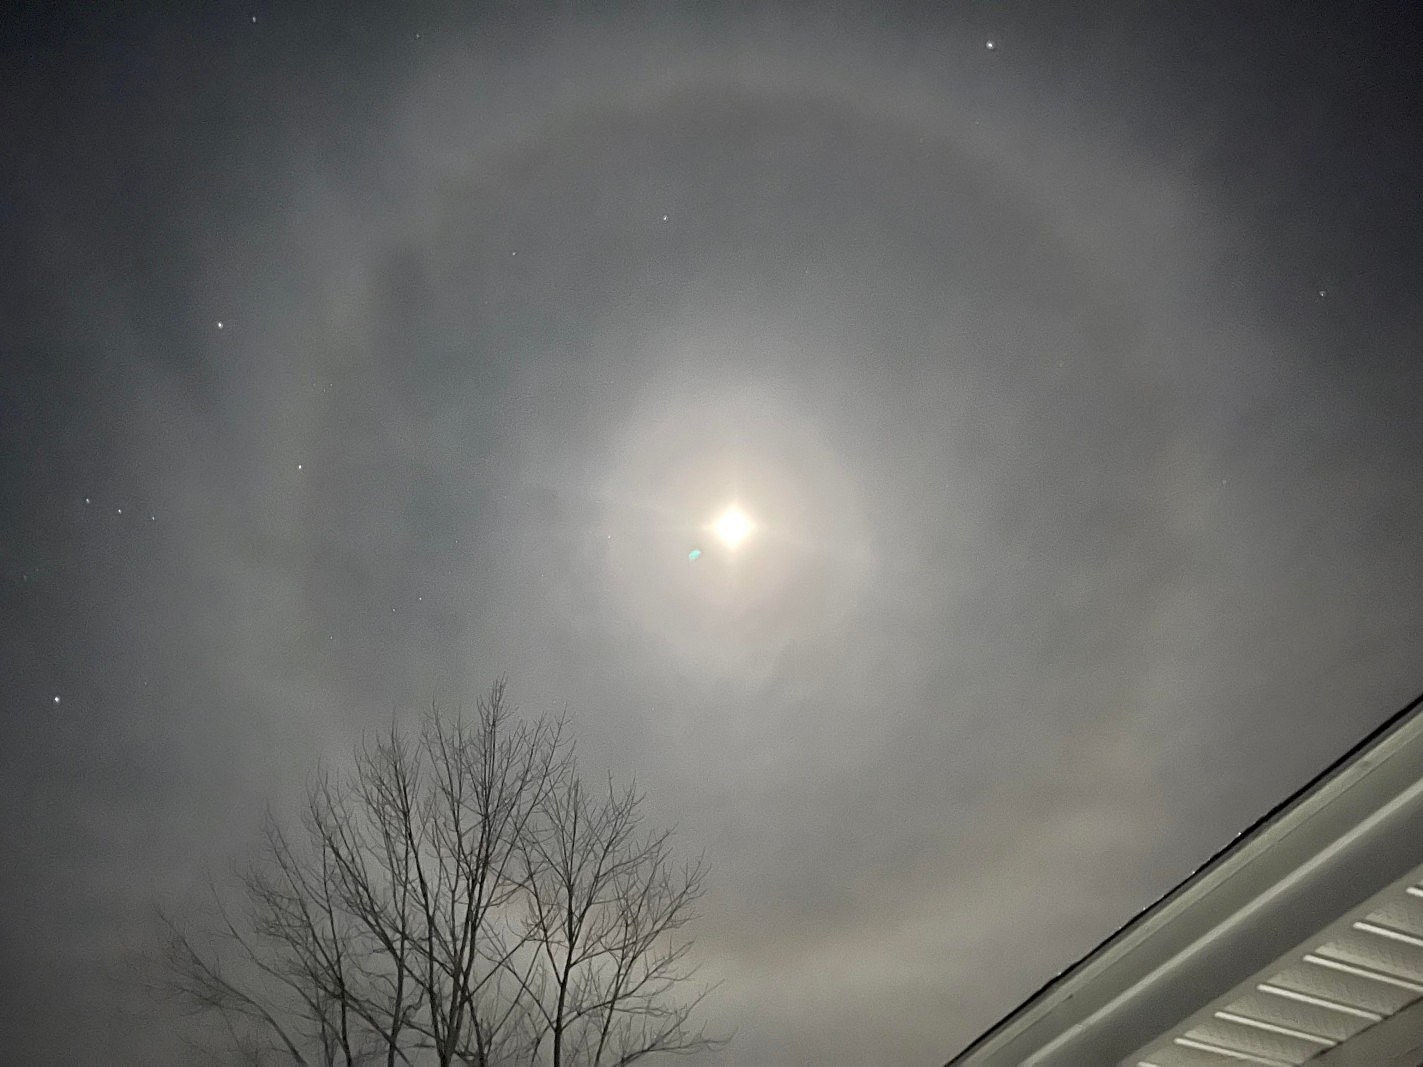 What's with the weird ring of light around the moon?